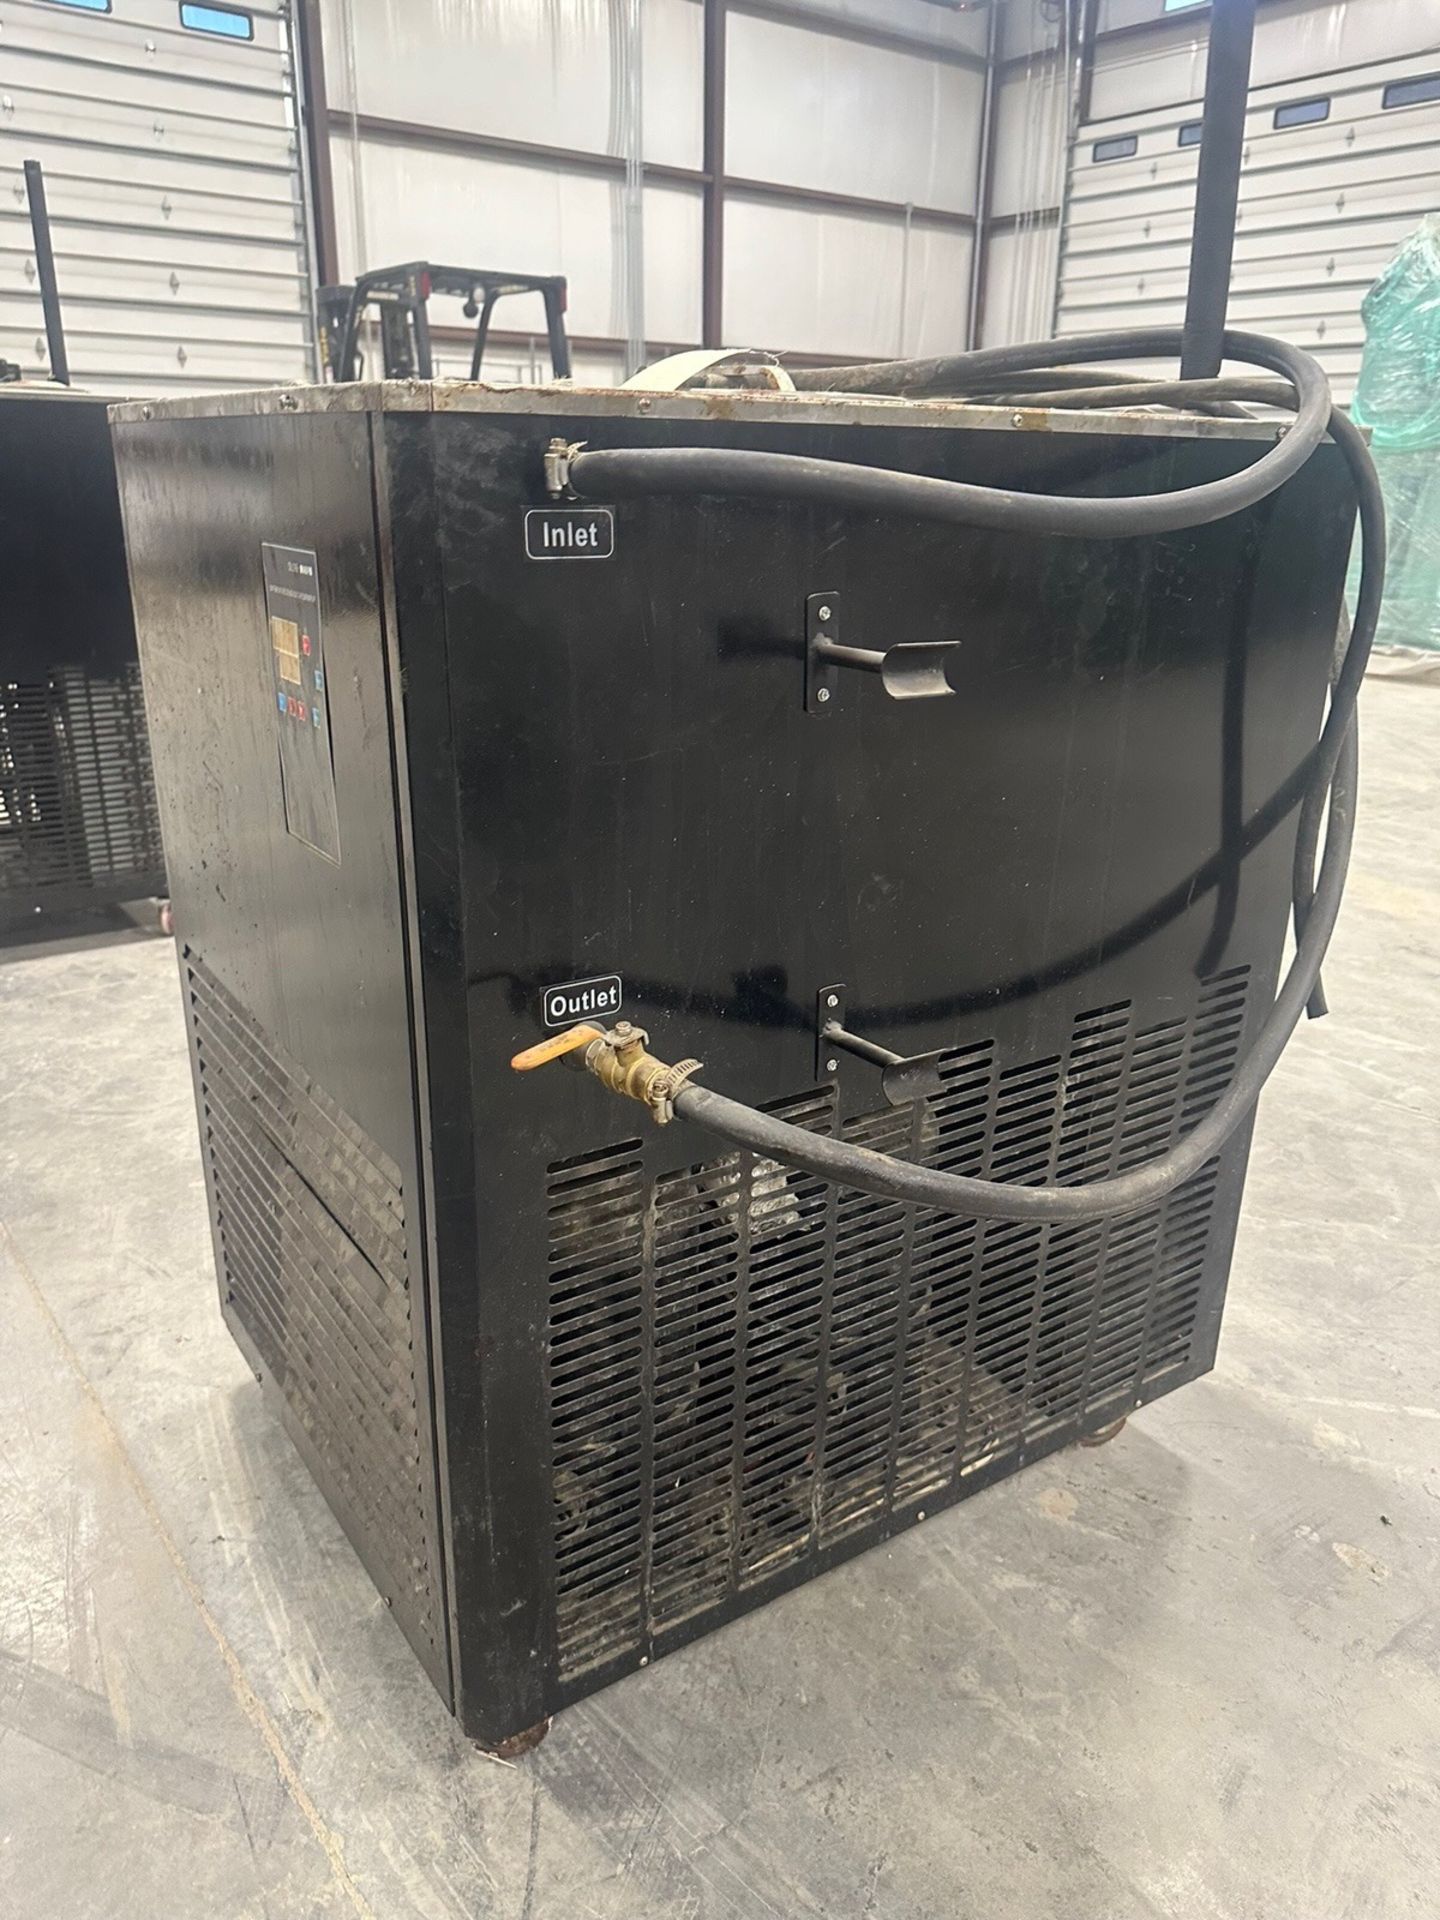 West Tune Extraction Refrigerated Circulator, Model, DLSB-20/80, Year 201 | Rig Fee $125 - Image 2 of 5